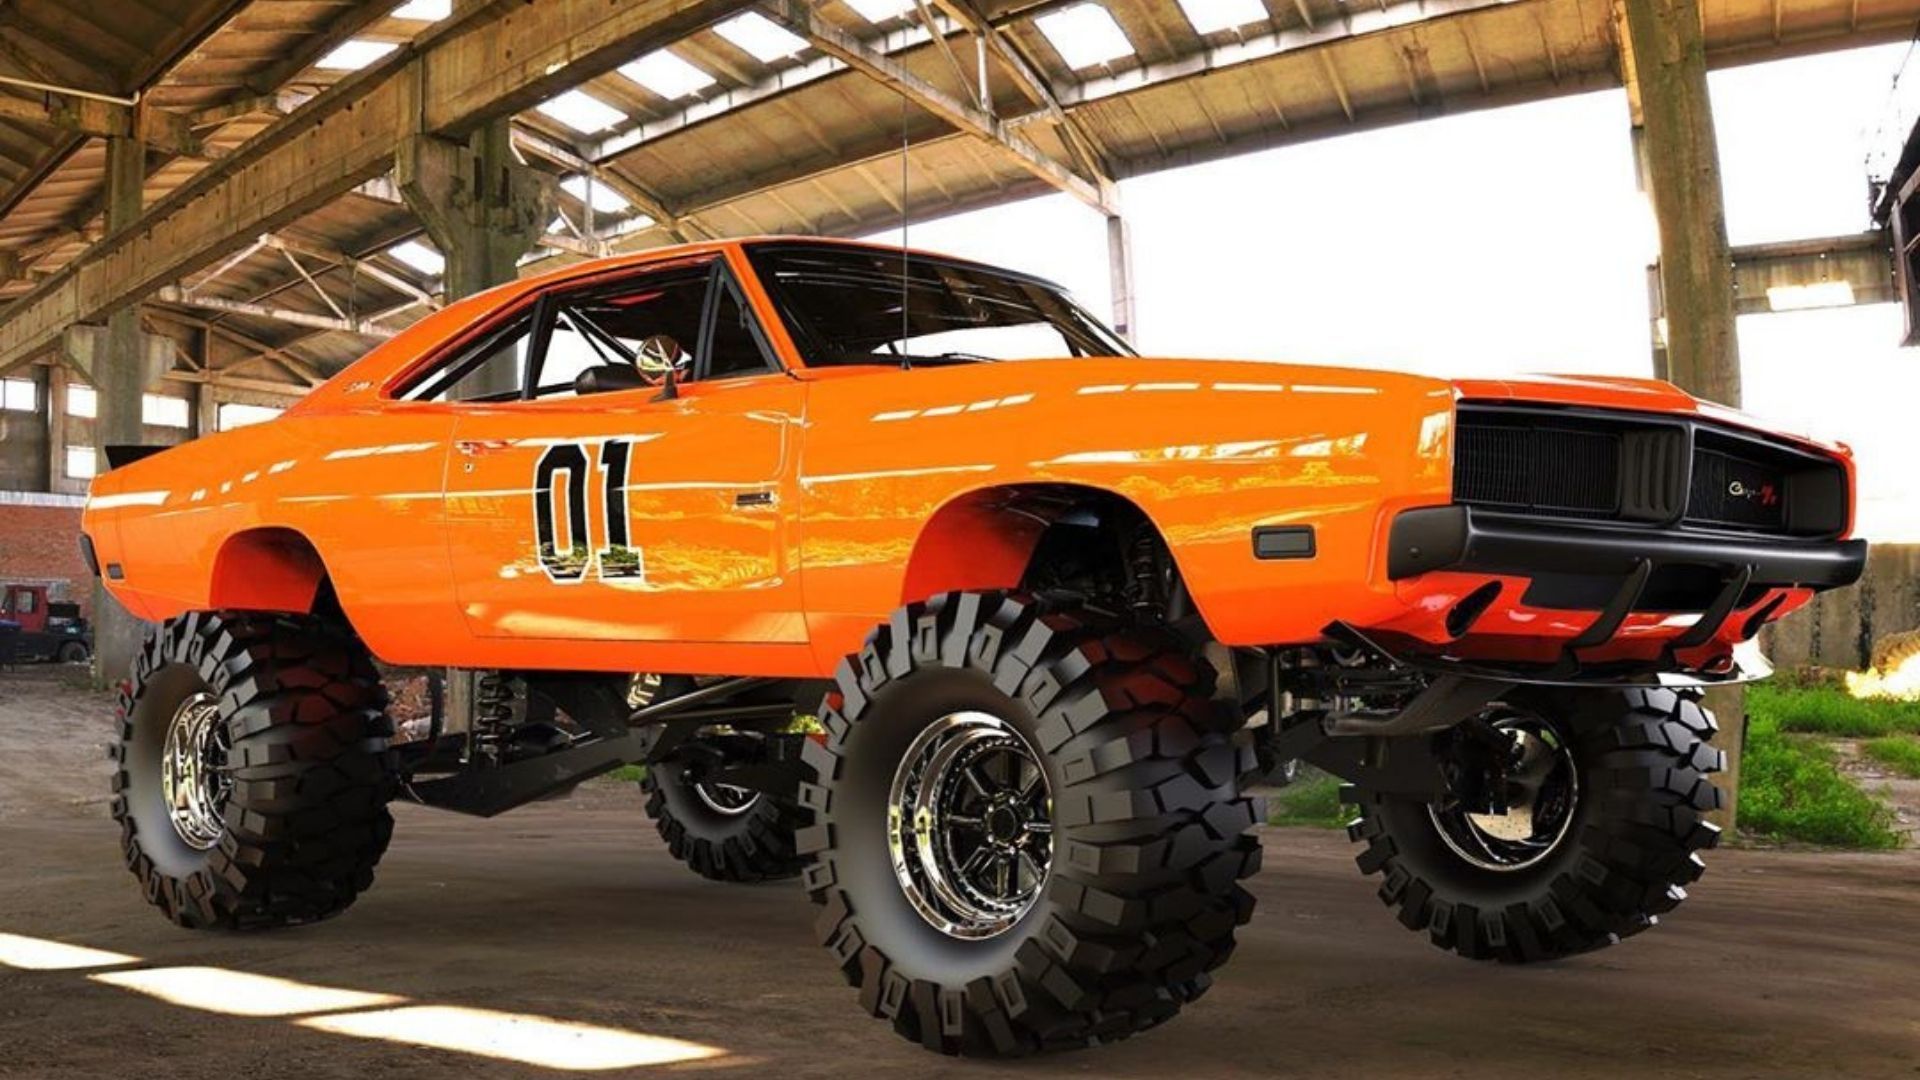 What Is The General Lee Car Online Shopping, Save 53 jlcatj.gob.mx